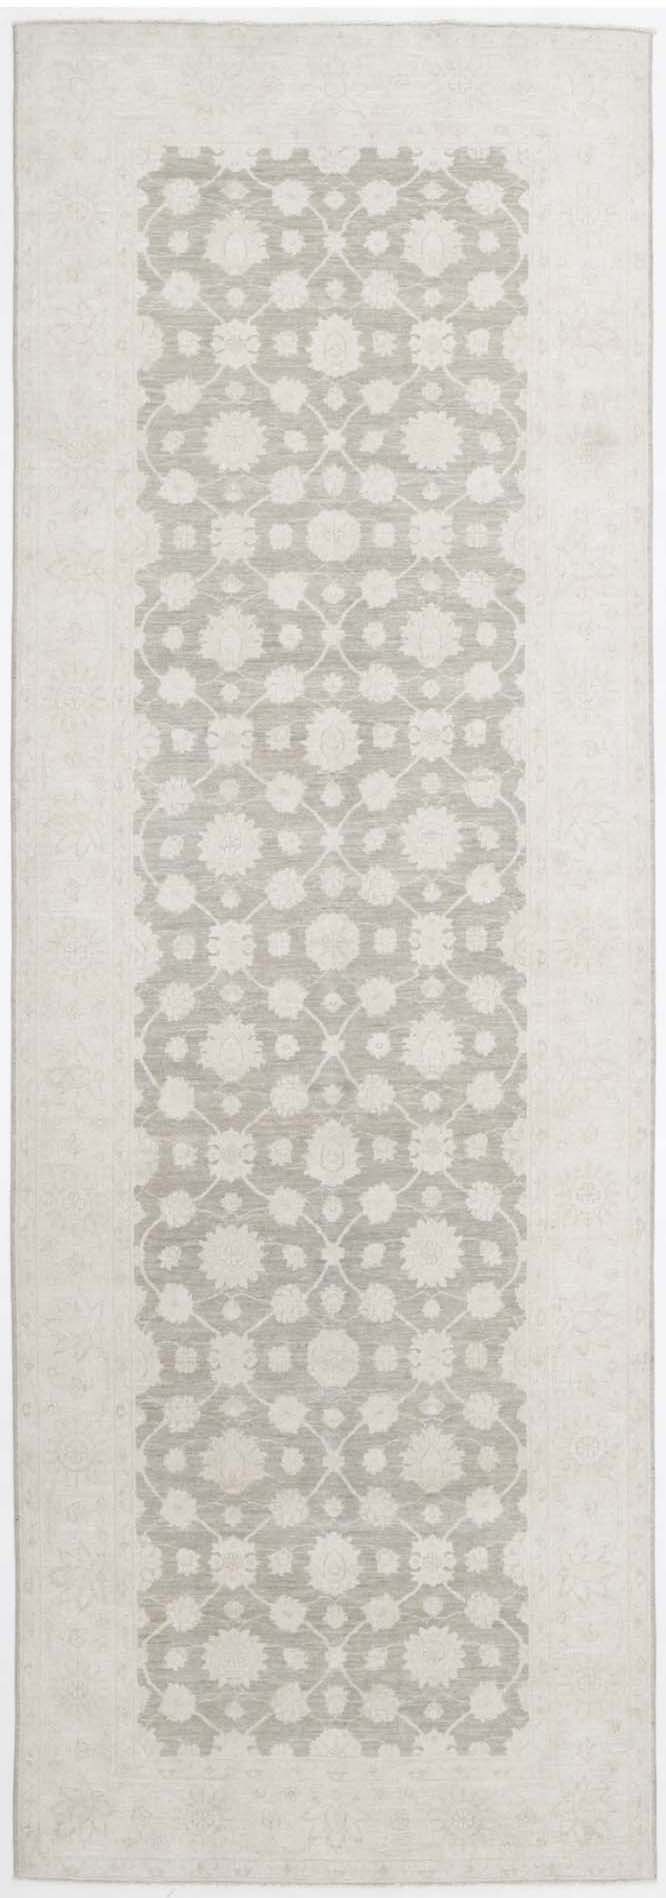 Hand Knotted Serenity Wool Rug - 4'7'' x 14'2''